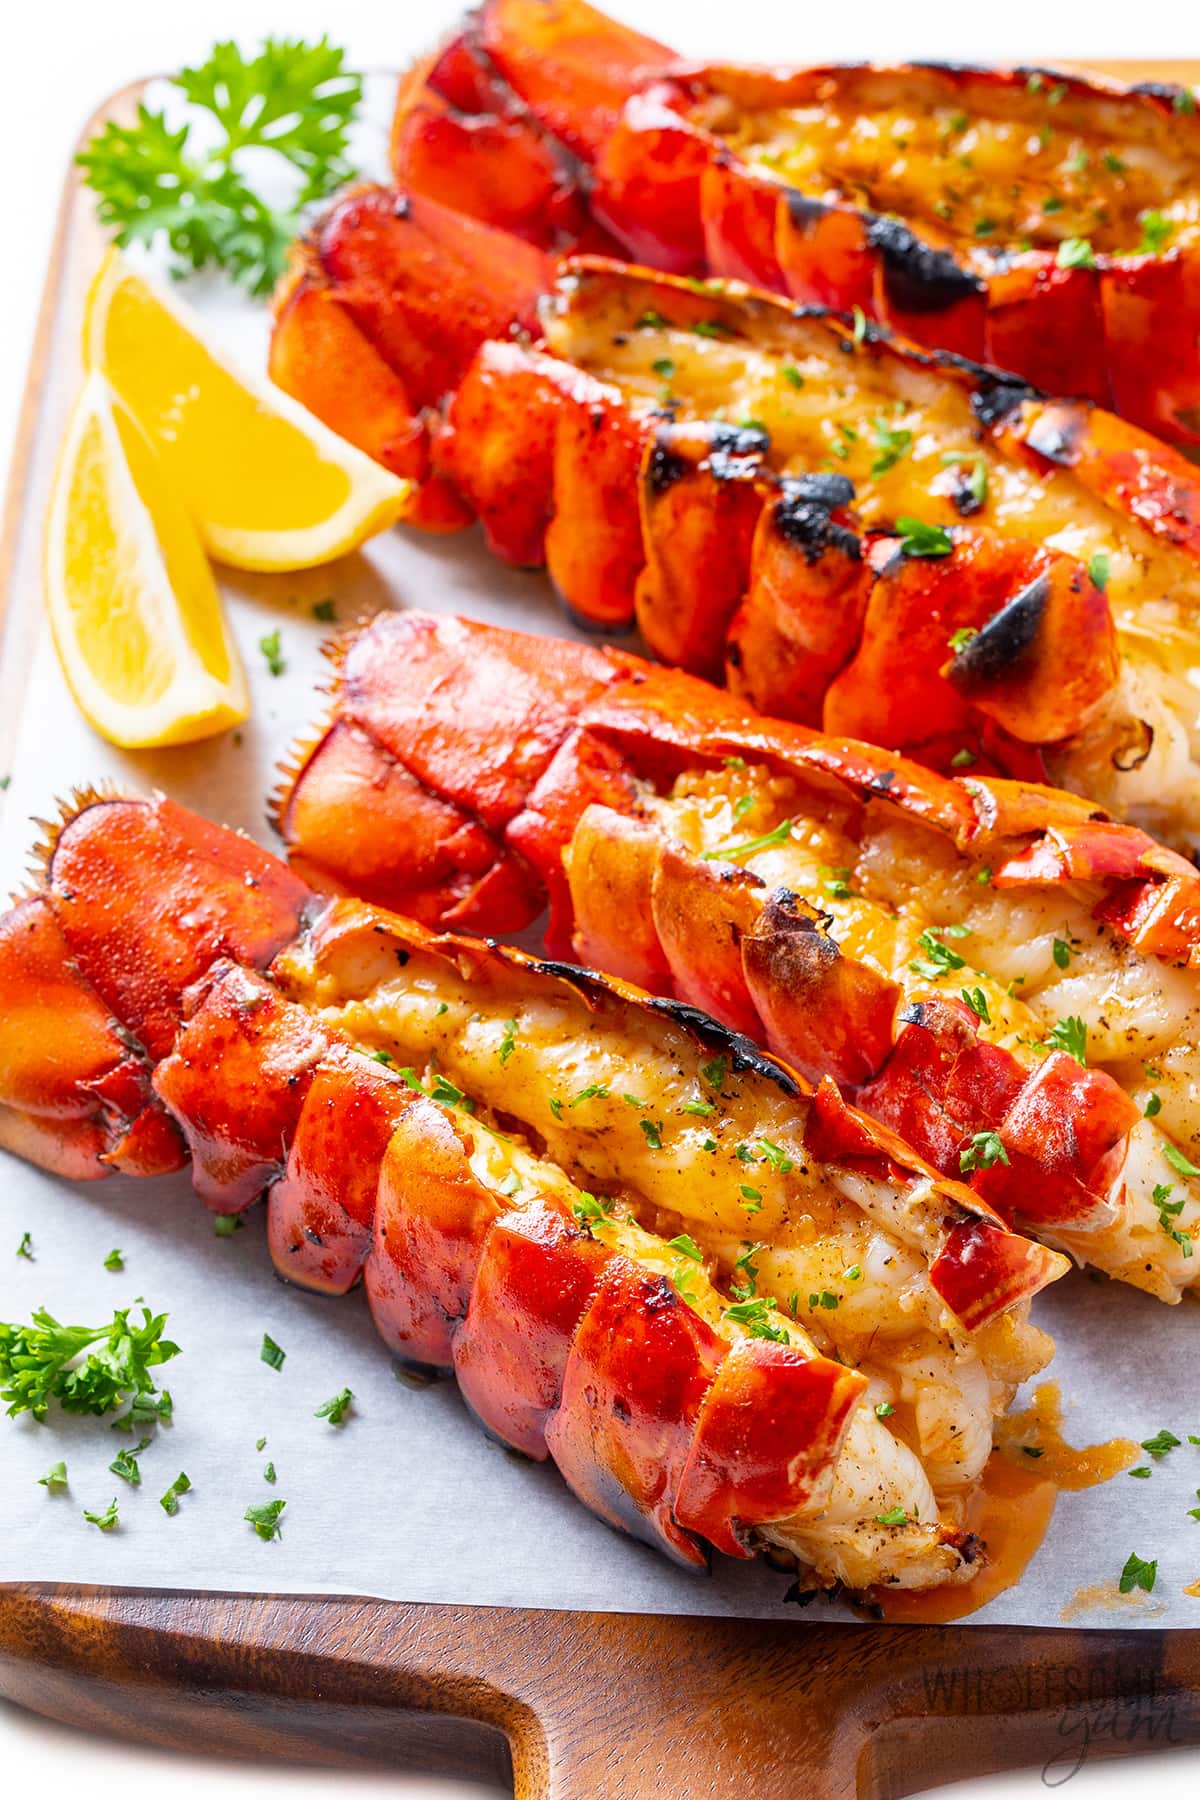 Four juicy grilled lobster tails on a cutting board and ready to serve.